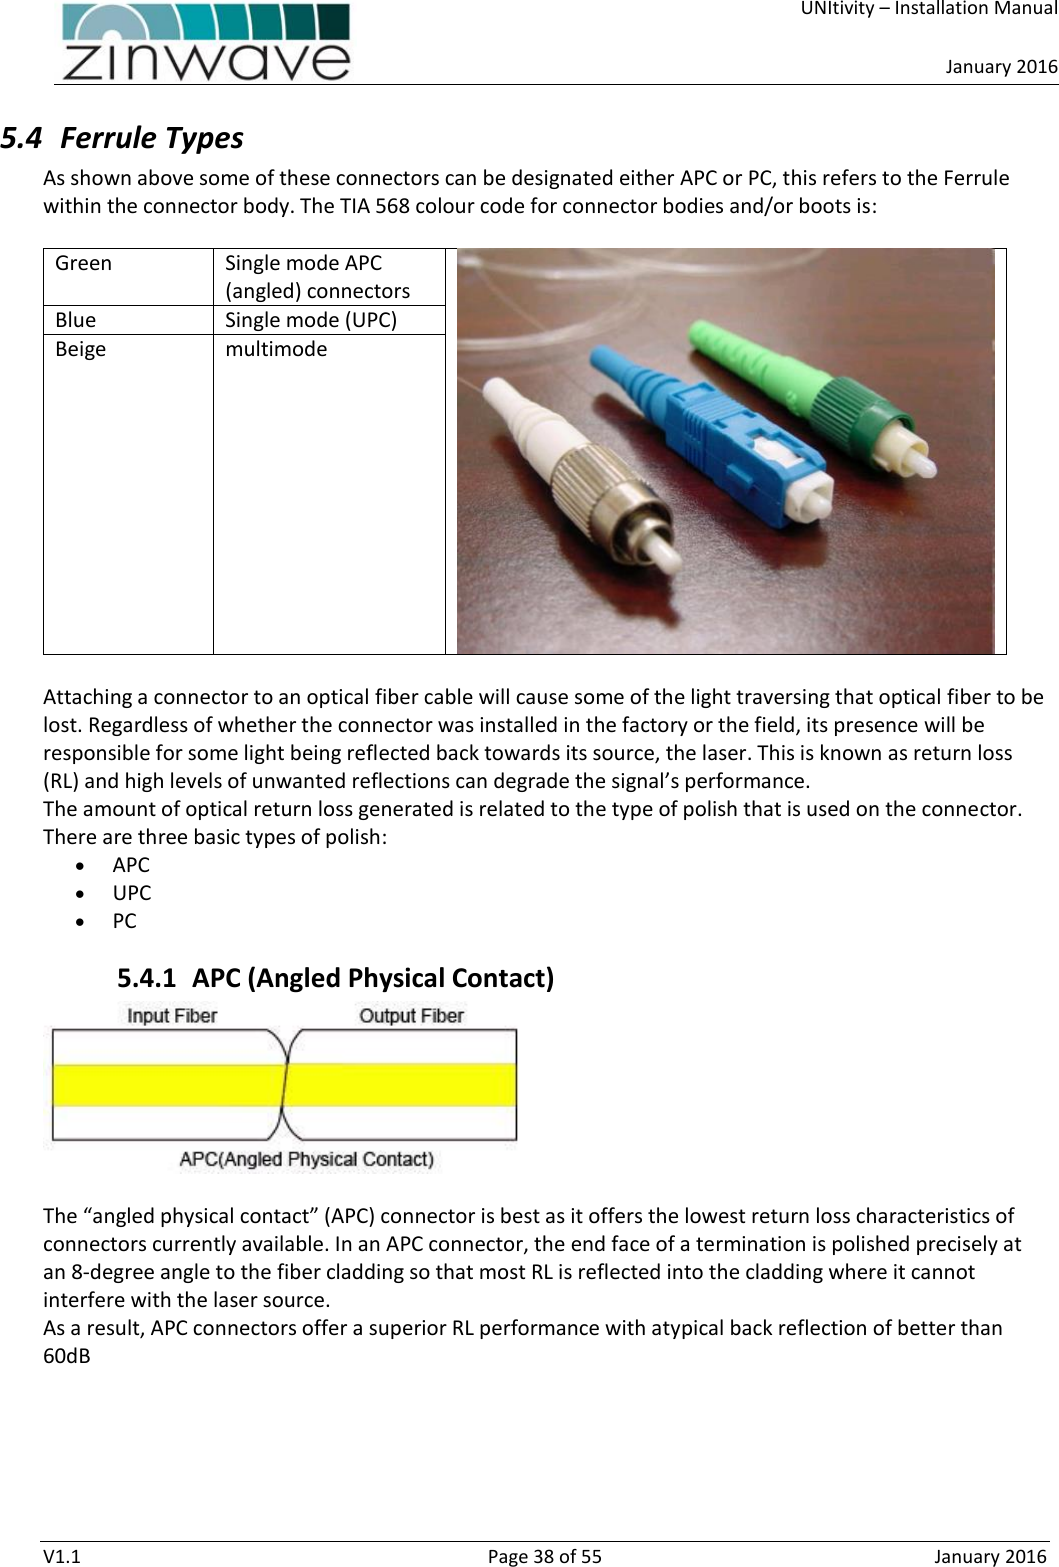     UNItivity – Installation Manual      January 2016  V1.1  Page 38 of 55  January 2016 5.4 Ferrule Types As shown above some of these connectors can be designated either APC or PC, this refers to the Ferrule within the connector body. The TIA 568 colour code for connector bodies and/or boots is:   Green Single mode APC (angled) connectors   Blue  Single mode (UPC) Beige  multimode   Attaching a connector to an optical fiber cable will cause some of the light traversing that optical fiber to be lost. Regardless of whether the connector was installed in the factory or the field, its presence will be responsible for some light being reflected back towards its source, the laser. This is known as return loss (RL) and high levels of unwanted reflections can degrade the signal’s performance. The amount of optical return loss generated is related to the type of polish that is used on the connector. There are three basic types of polish:  APC  UPC  PC 5.4.1 APC (Angled Physical Contact)    The “angled physical contact” (APC) connector is best as it offers the lowest return loss characteristics of connectors currently available. In an APC connector, the end face of a termination is polished precisely at an 8-degree angle to the fiber cladding so that most RL is reflected into the cladding where it cannot interfere with the laser source.  As a result, APC connectors offer a superior RL performance with atypical back reflection of better than 60dB 